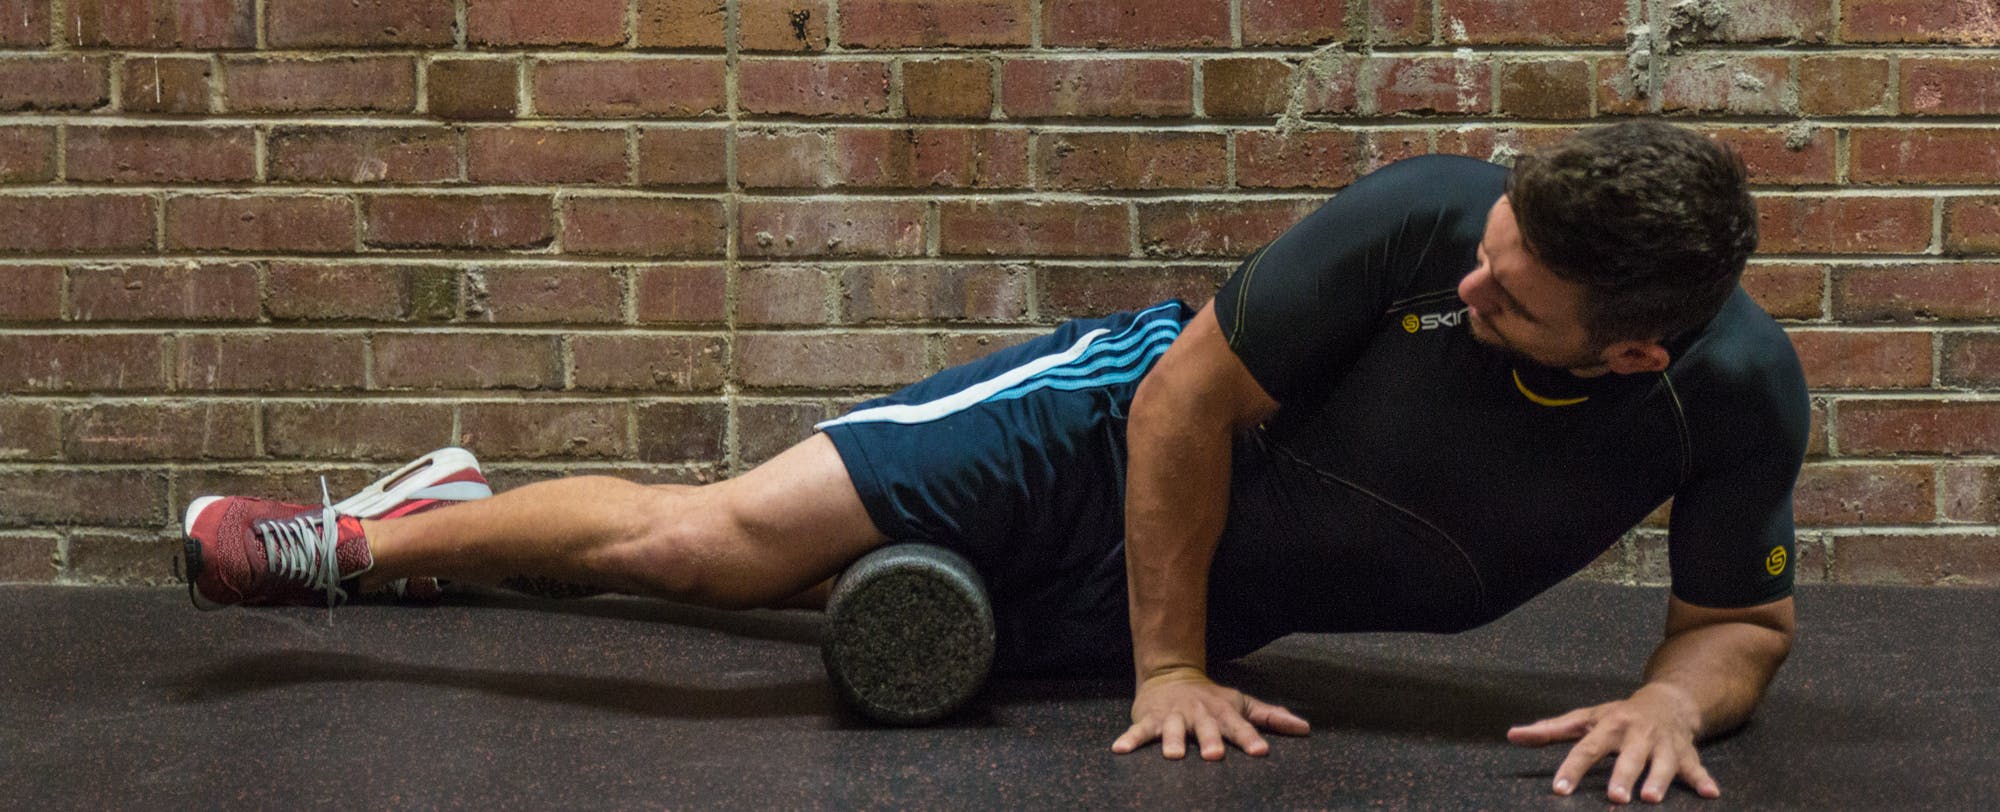 6 Foam Rolling Exercises for Runners